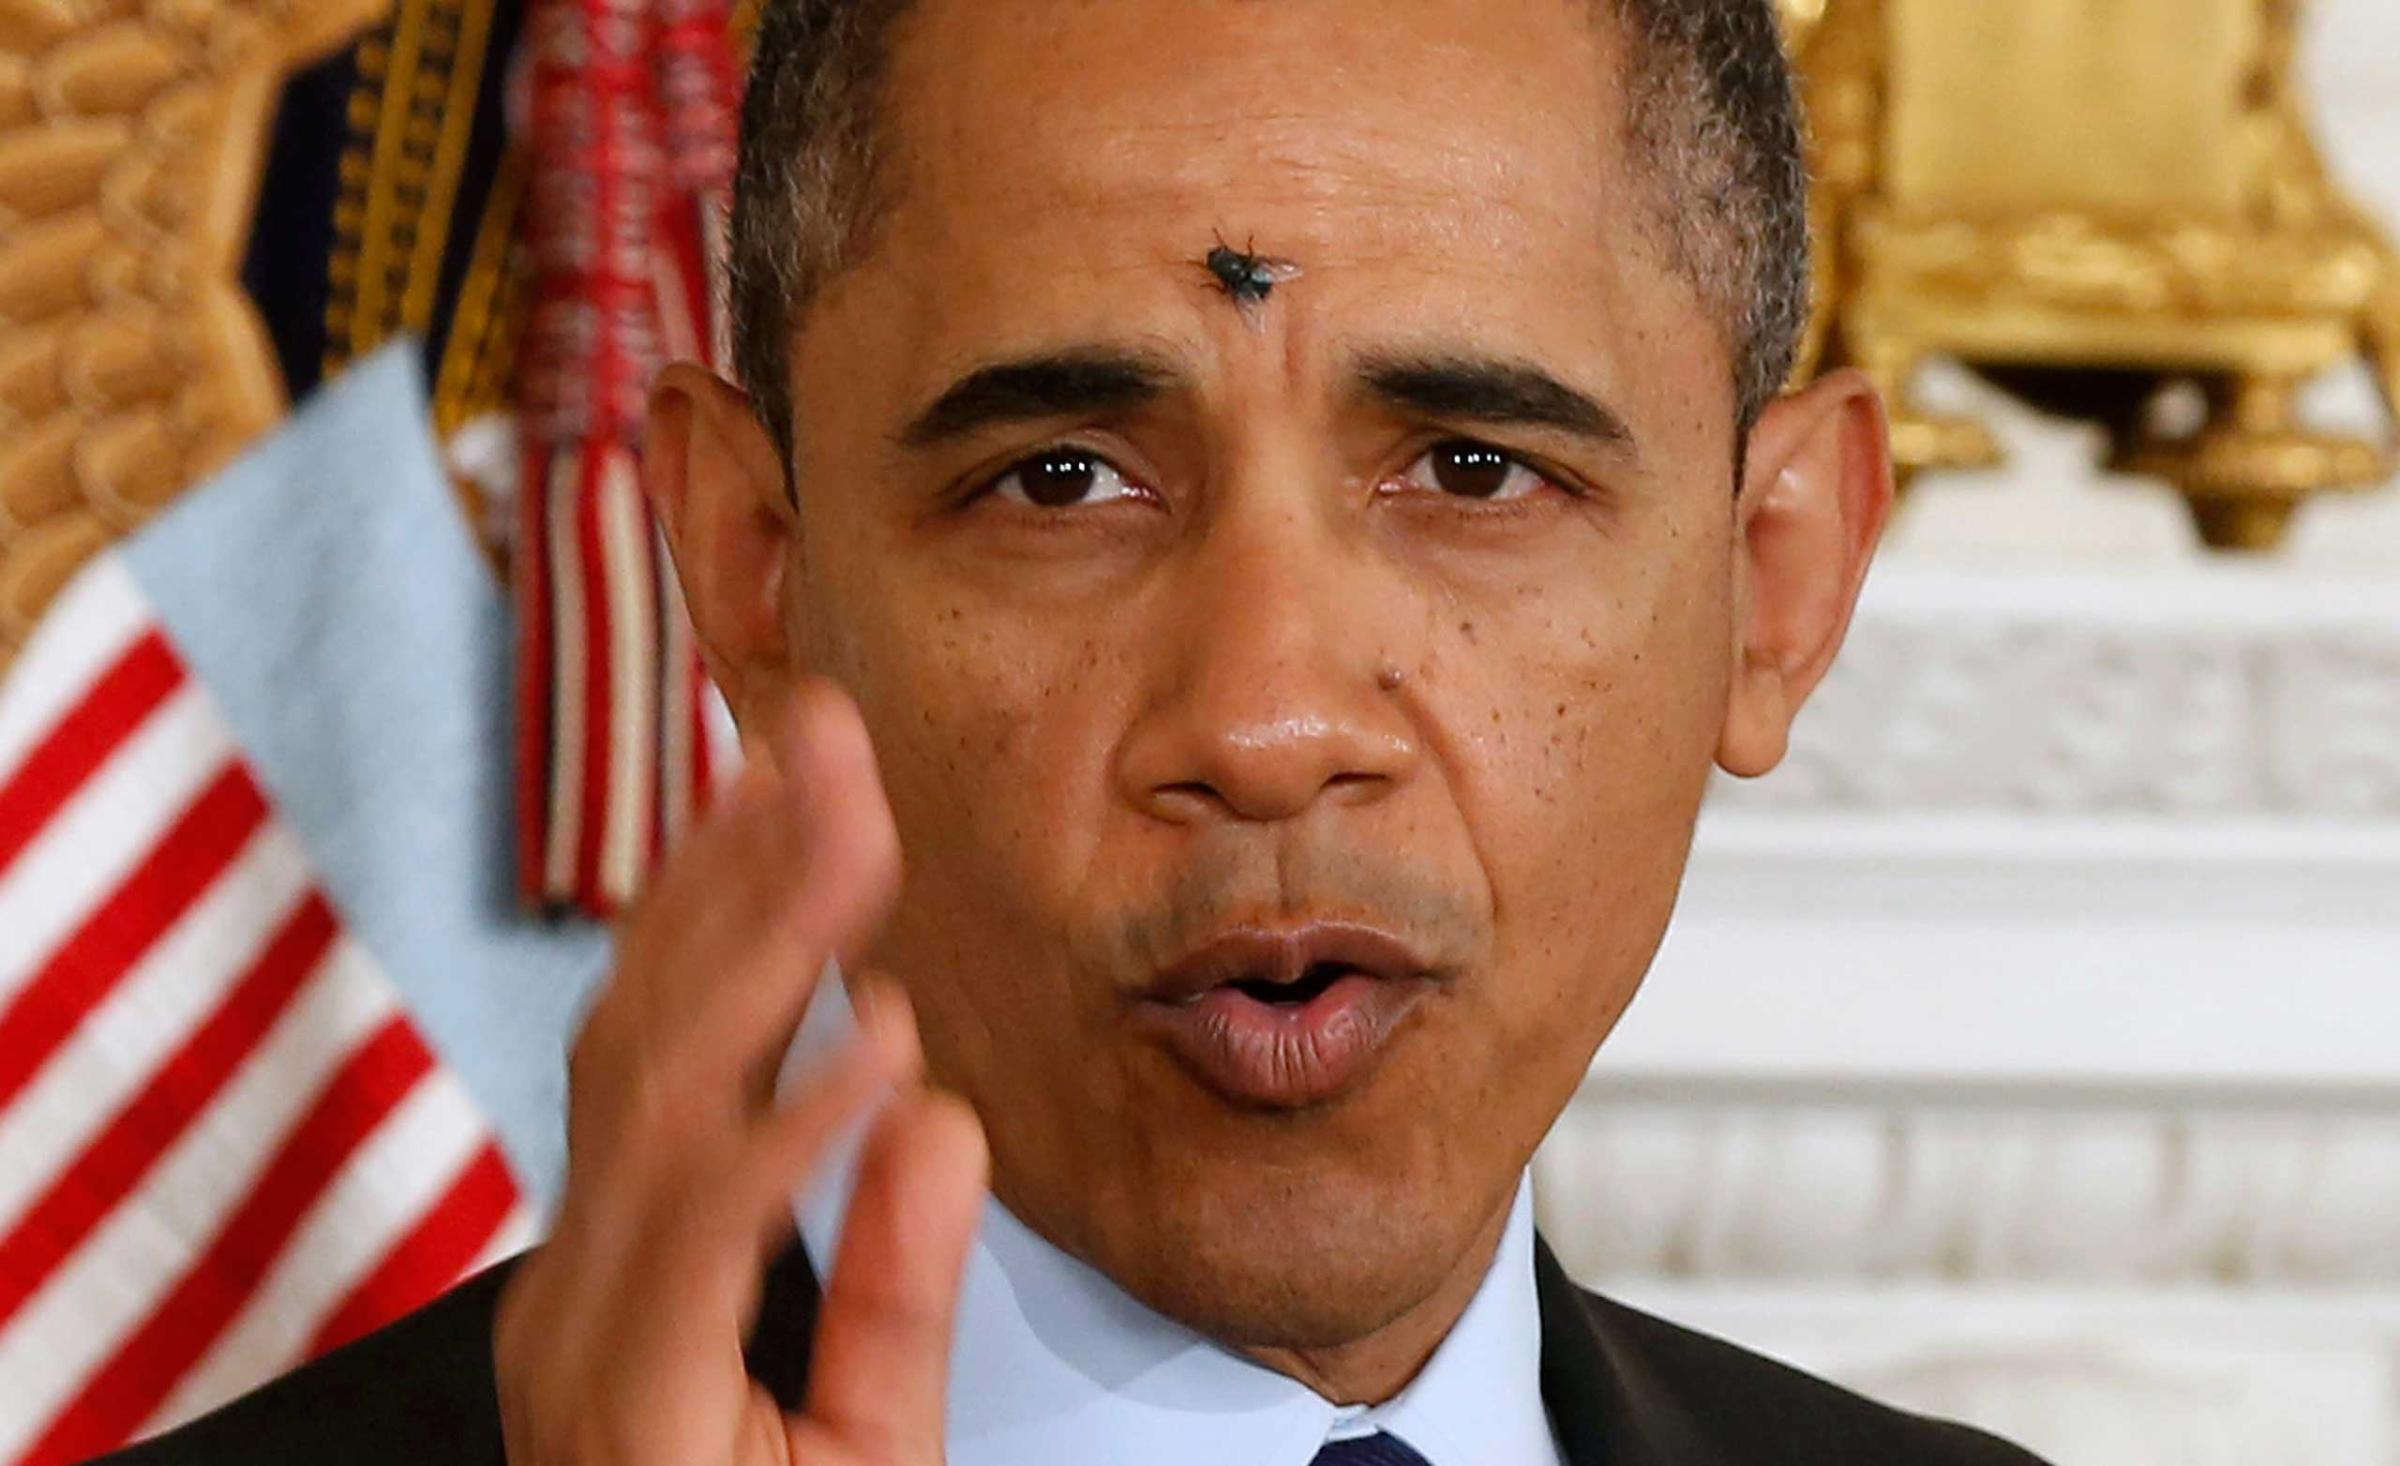 A fly lands on the head of U.S. President Barack Obama at the White House in Washington